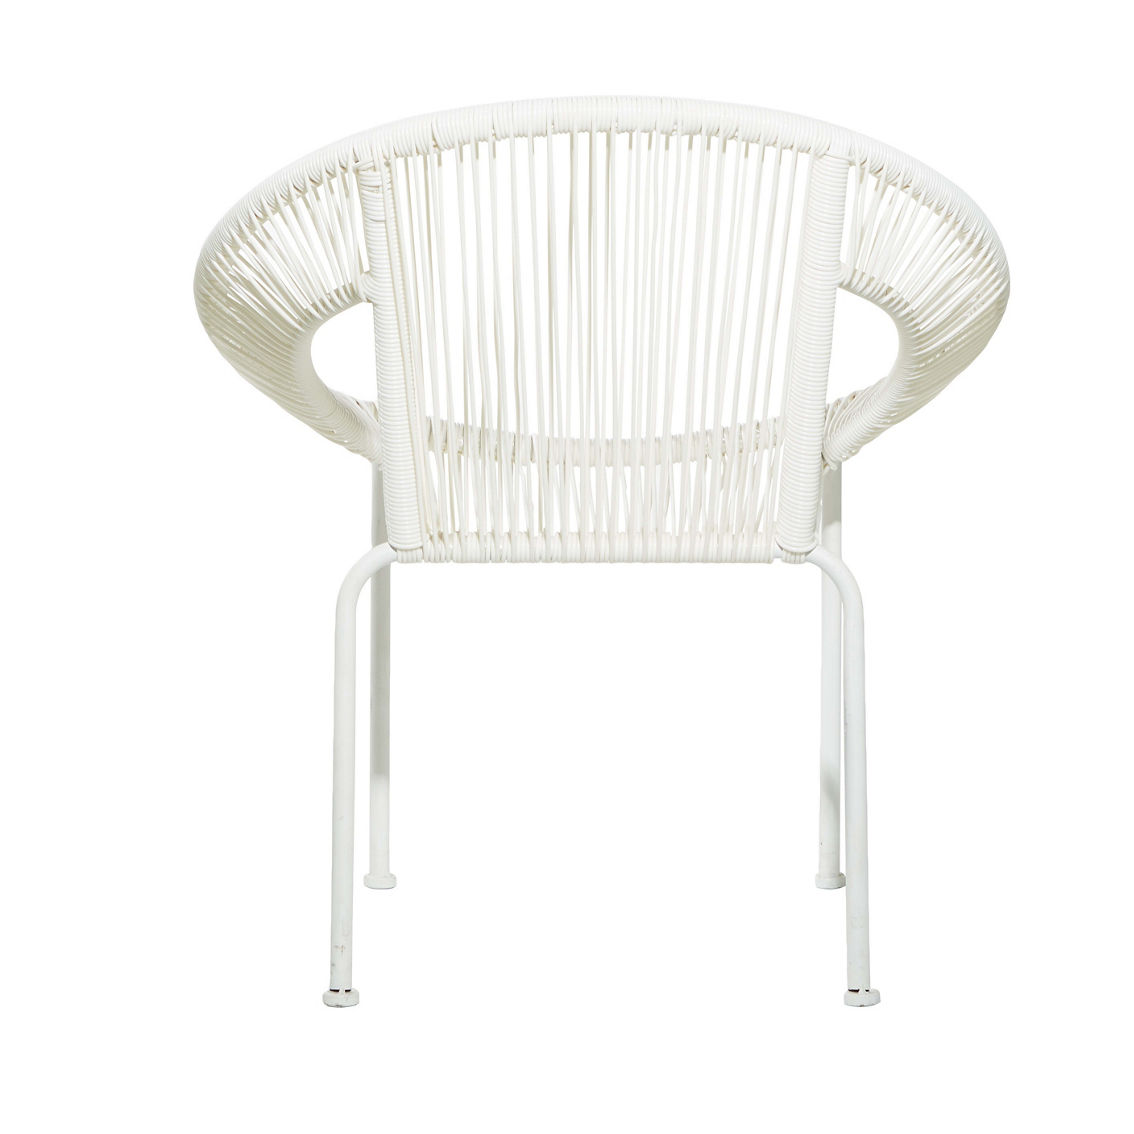 Morgan Hill Home Contemporary Black Plastic Rattan Outdoor Chair - Image 3 of 5